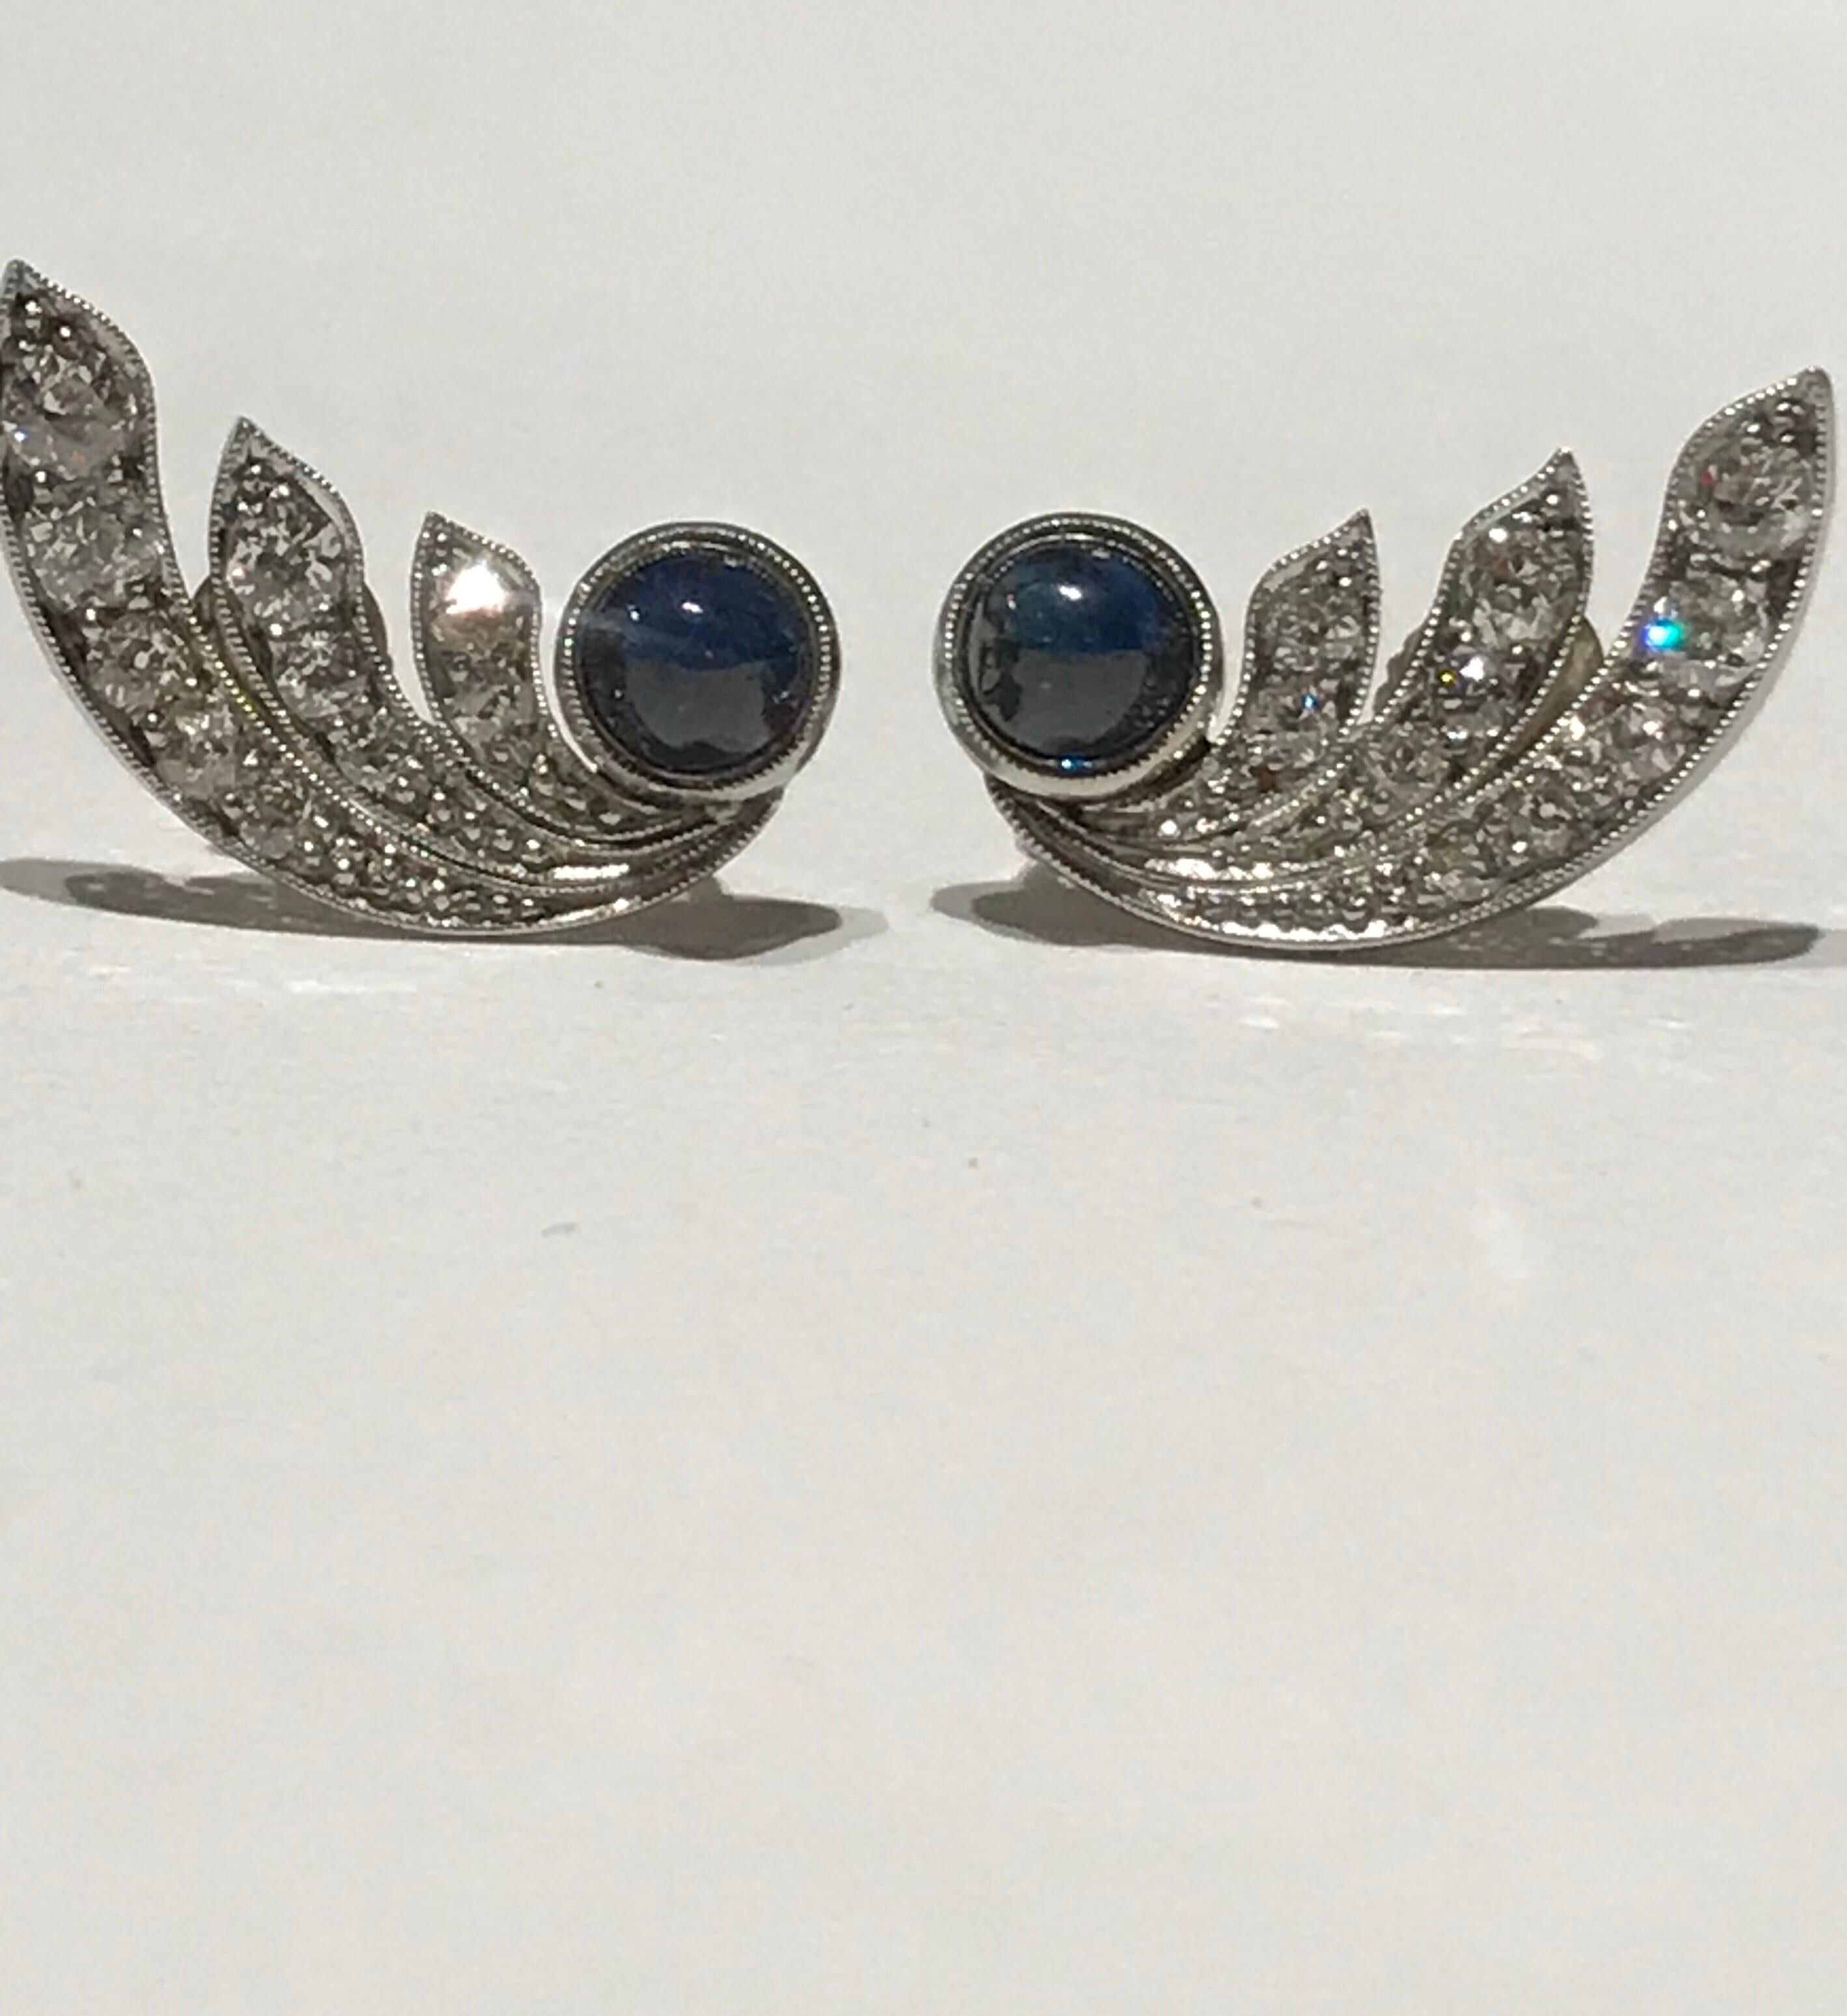 Art deco sugarloaf sapphire and diamond earrings set in 18 karat gold at the moment they have screw backs but I can have omega backs replace these ones in 18 karat gold to match if requested for no extra cost.  The diamonds are rose cuts and total